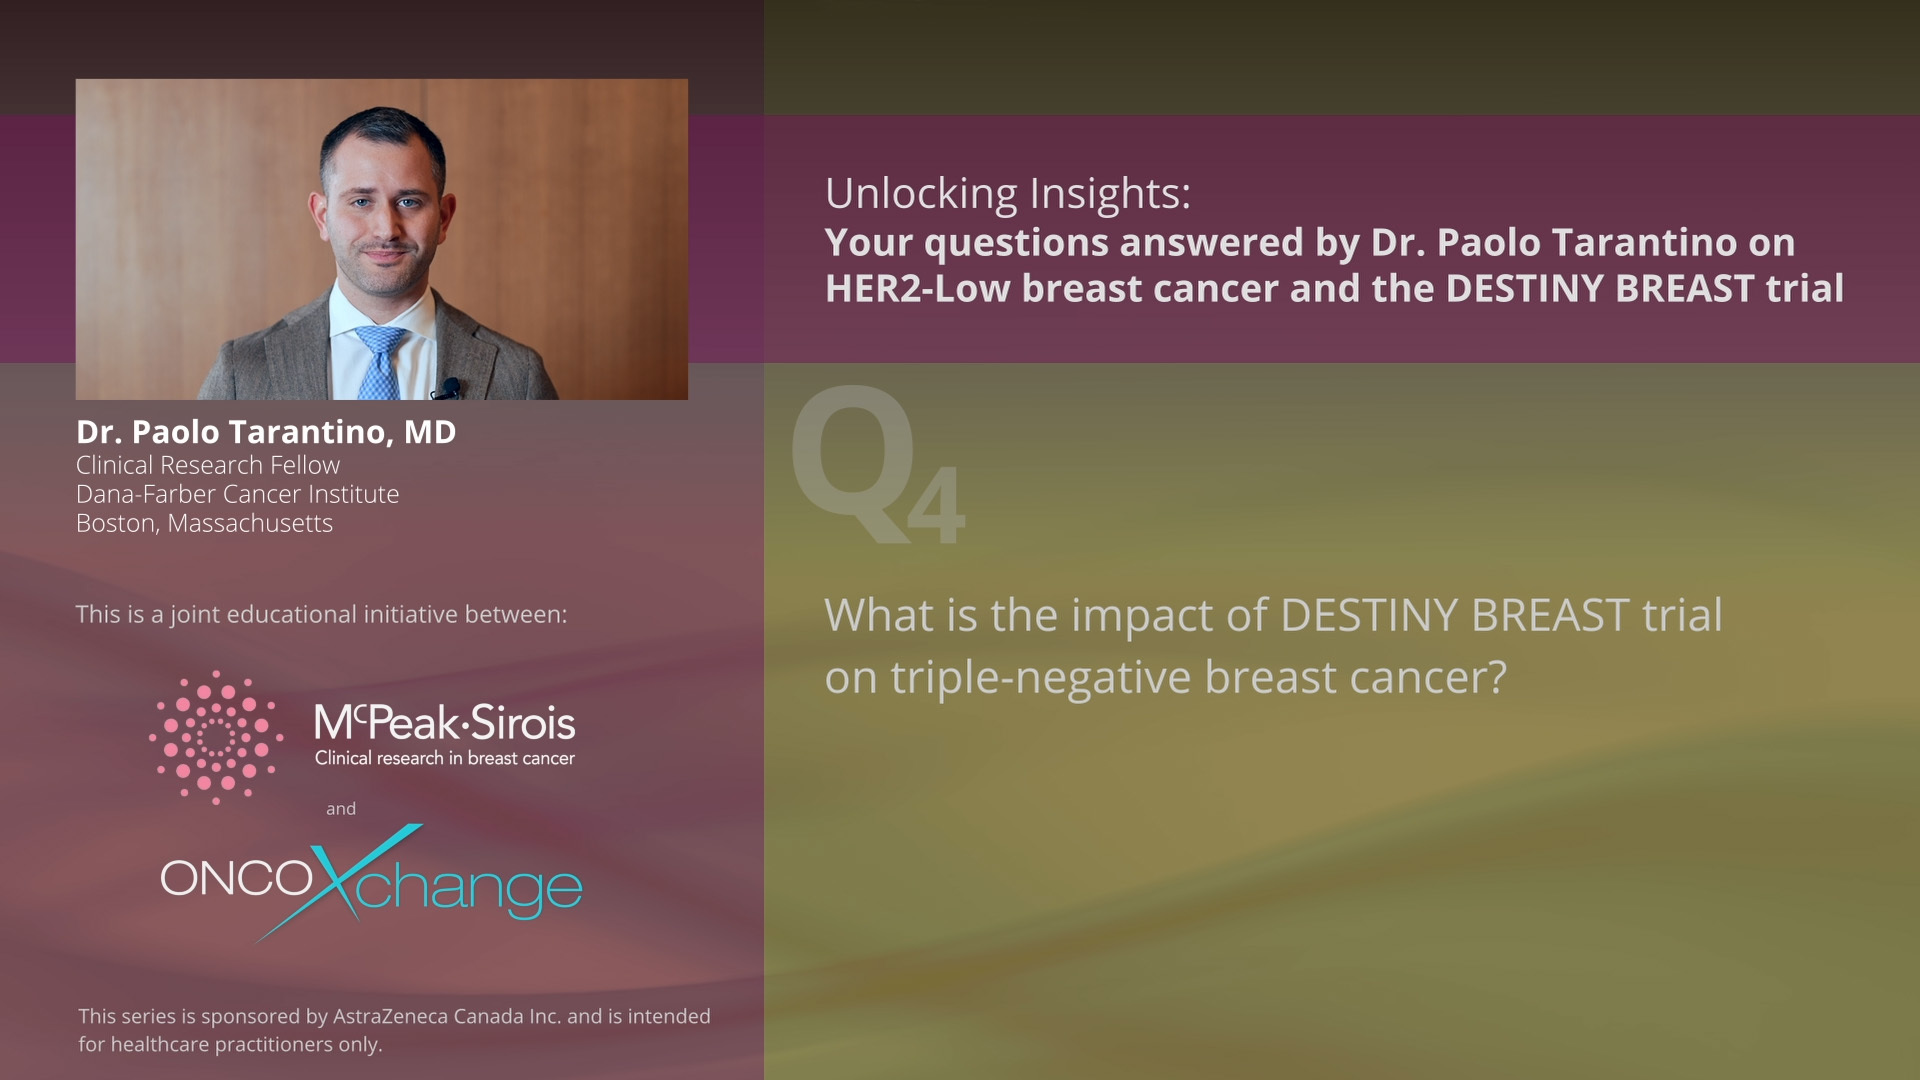 Q4: What is the impact of DESTINY BREAST trial on triple-negative breast cancer?